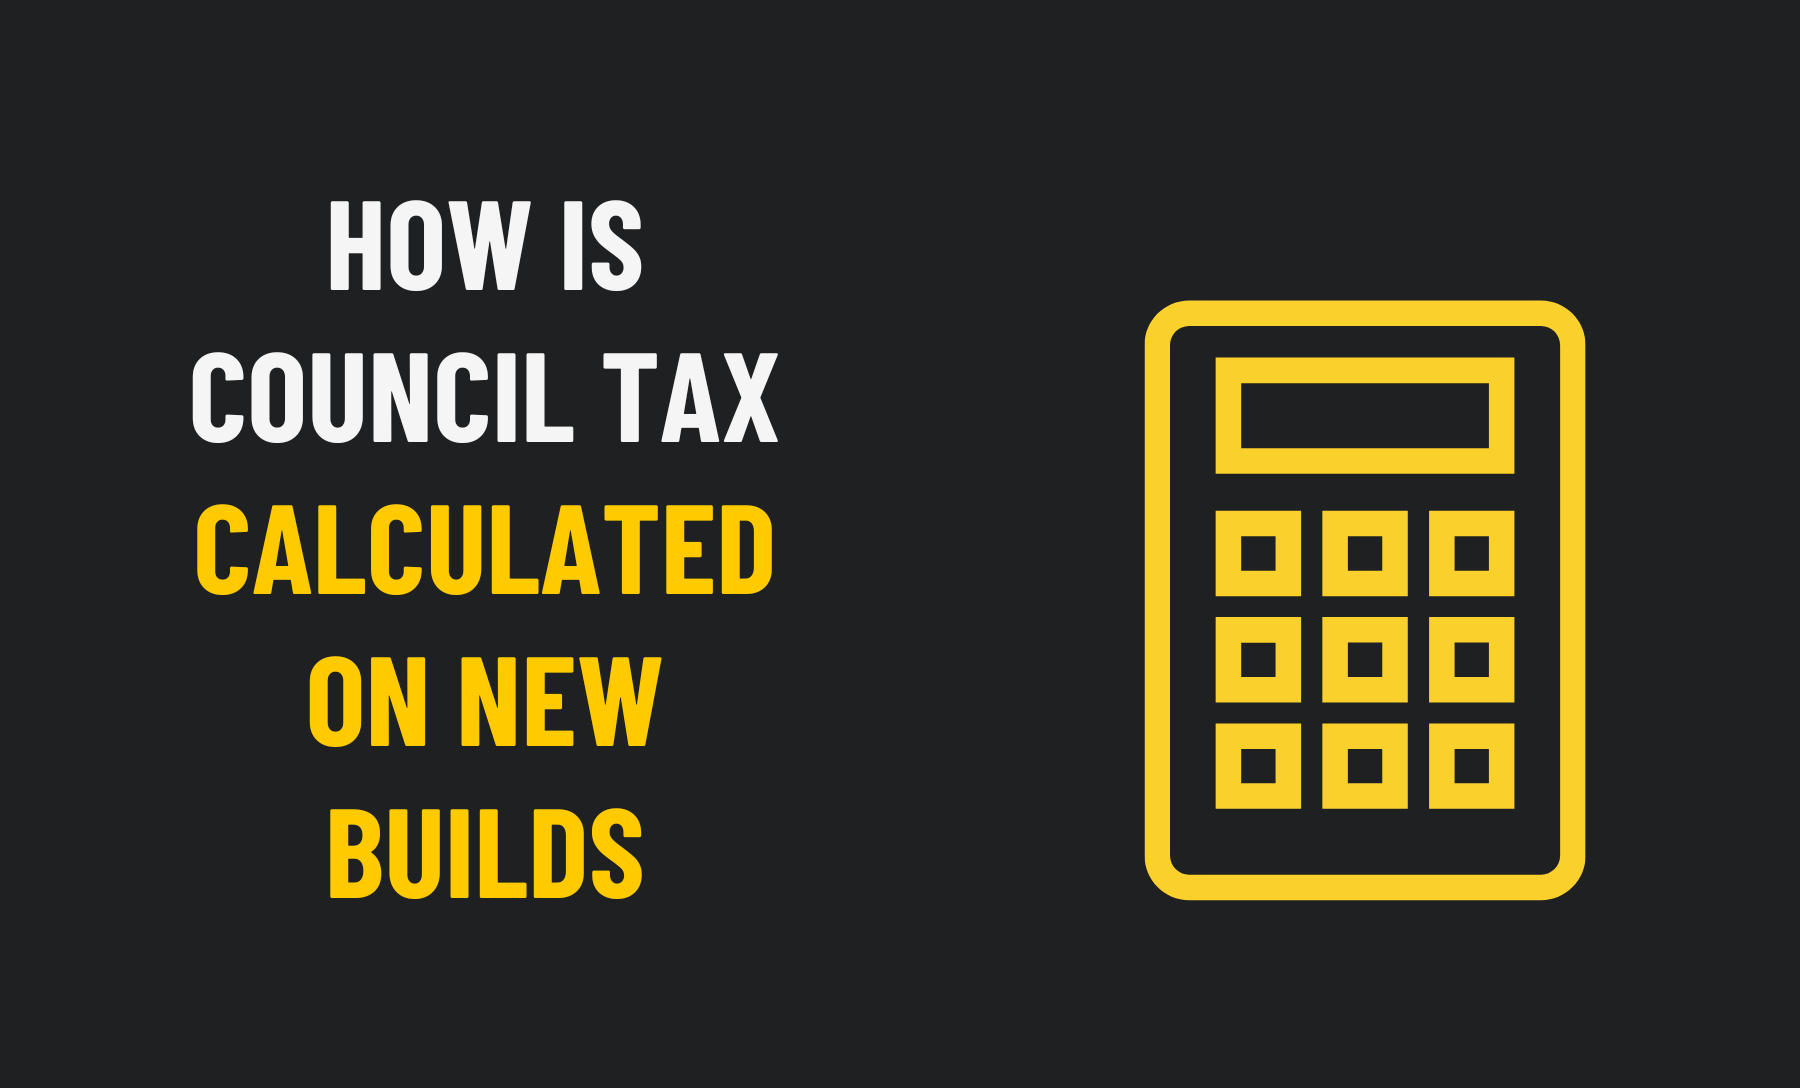 How is Council Tax Calculated on New Builds